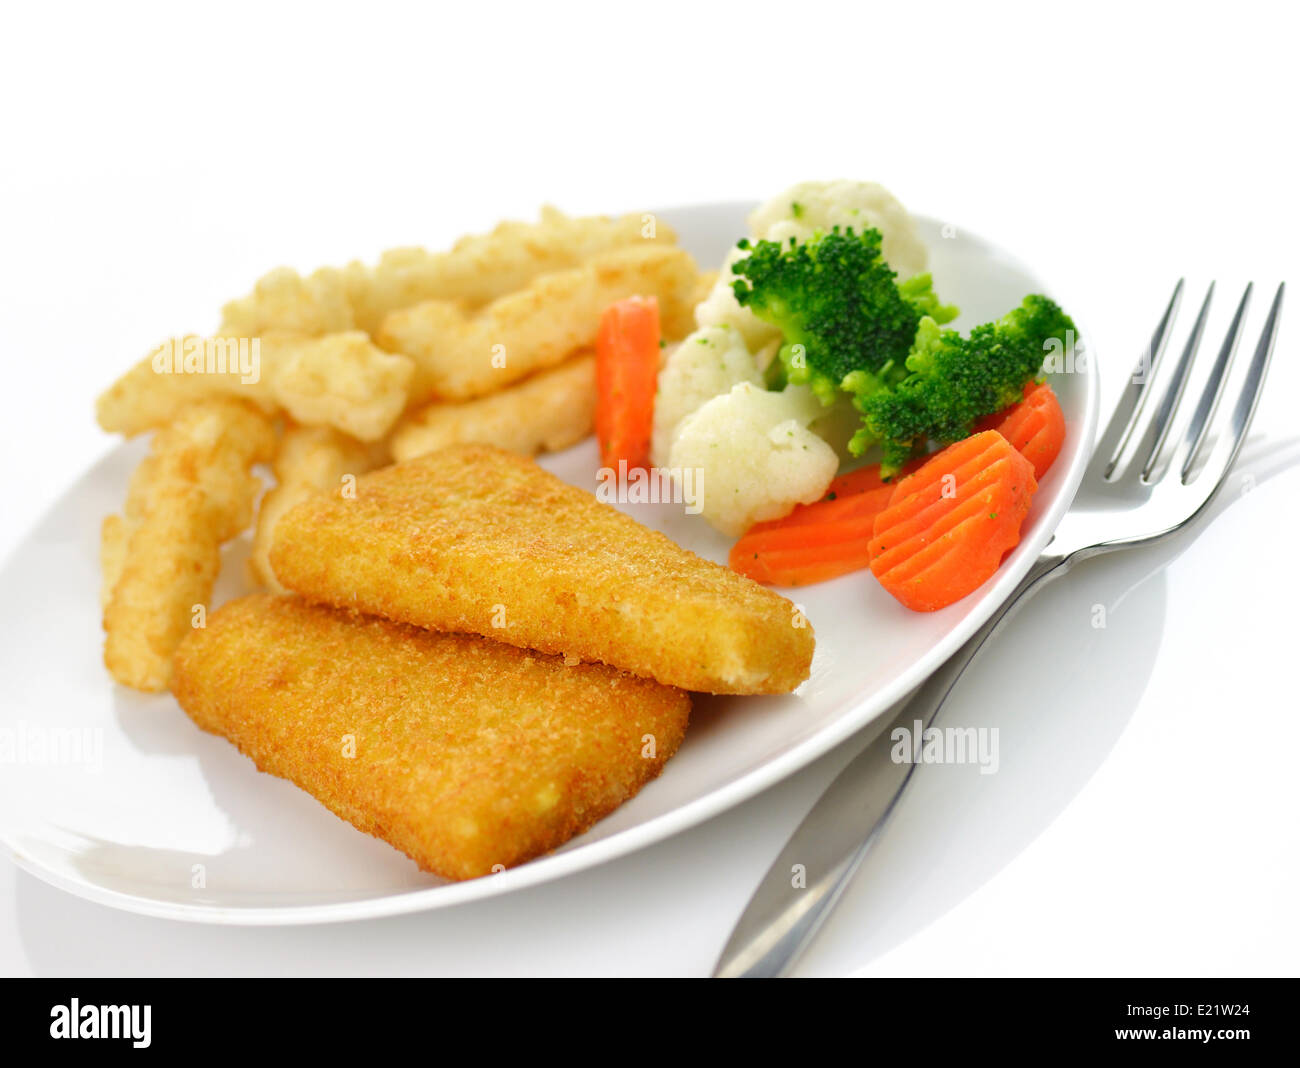 fish fillets with fried potato and vegetables Stock Photo